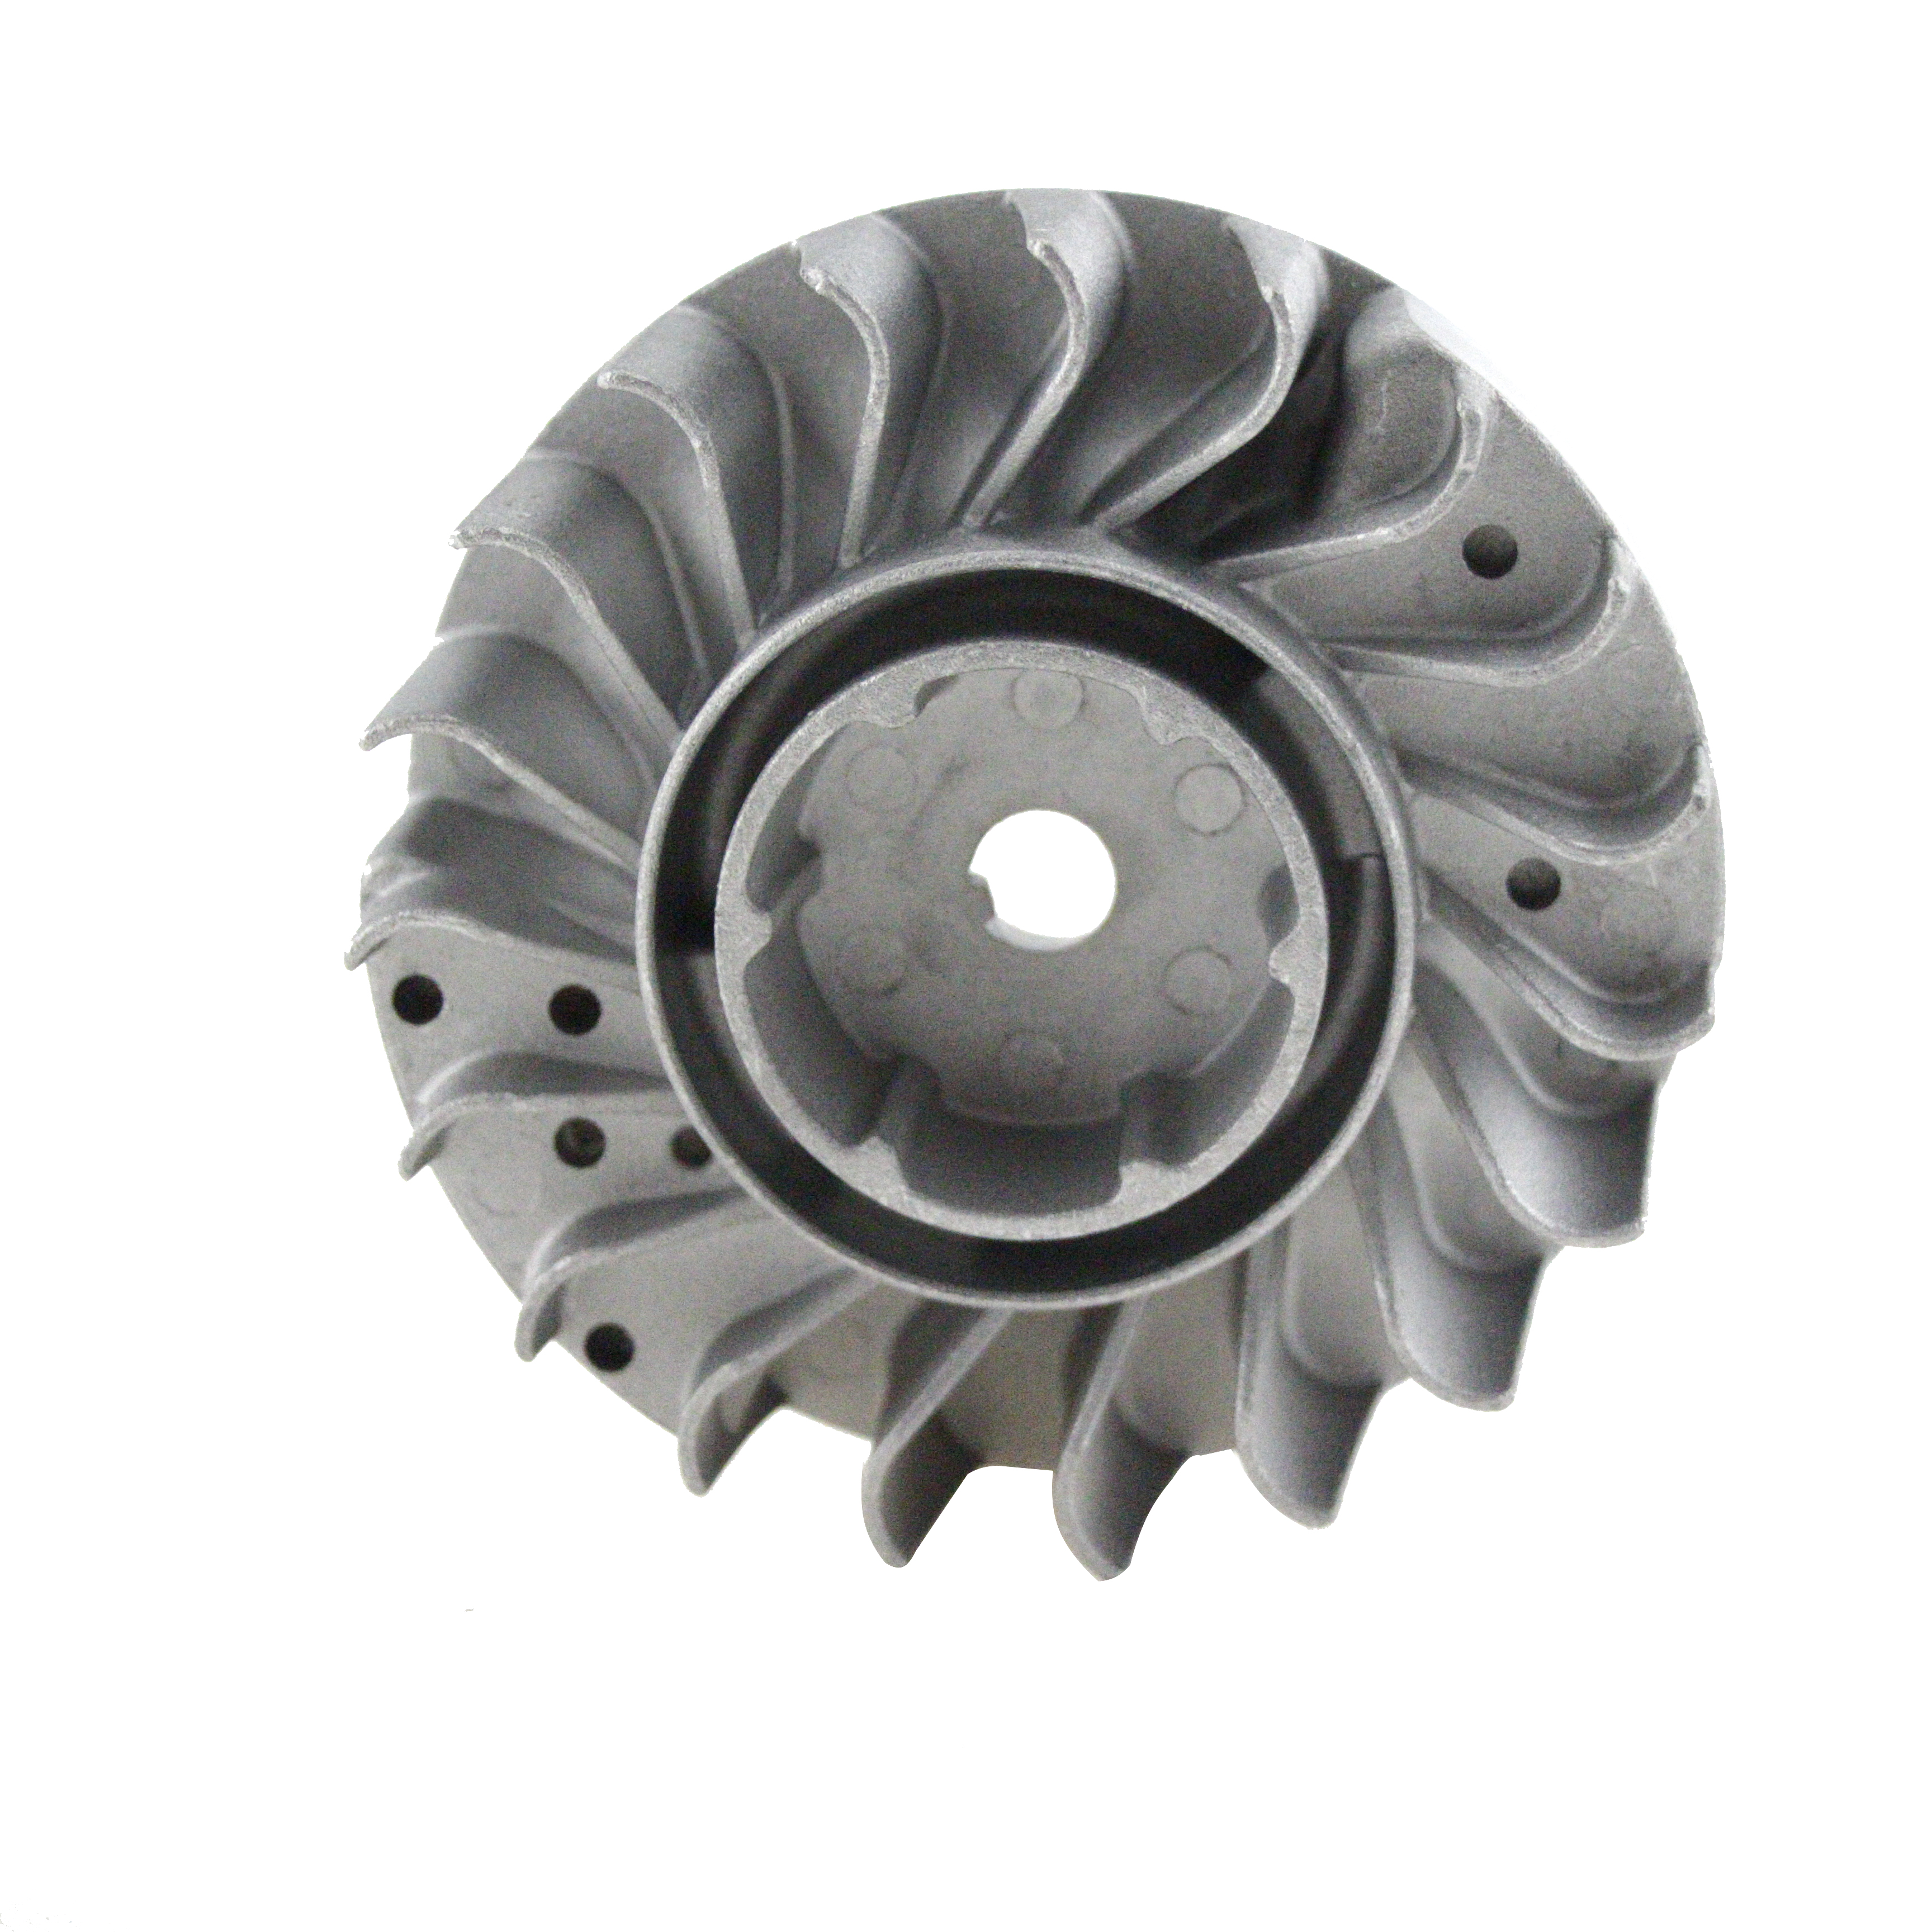 Flywheel Fly Wheel For Stihl MS251 MS 251 Chainsaw Replaces 1143 400 1234